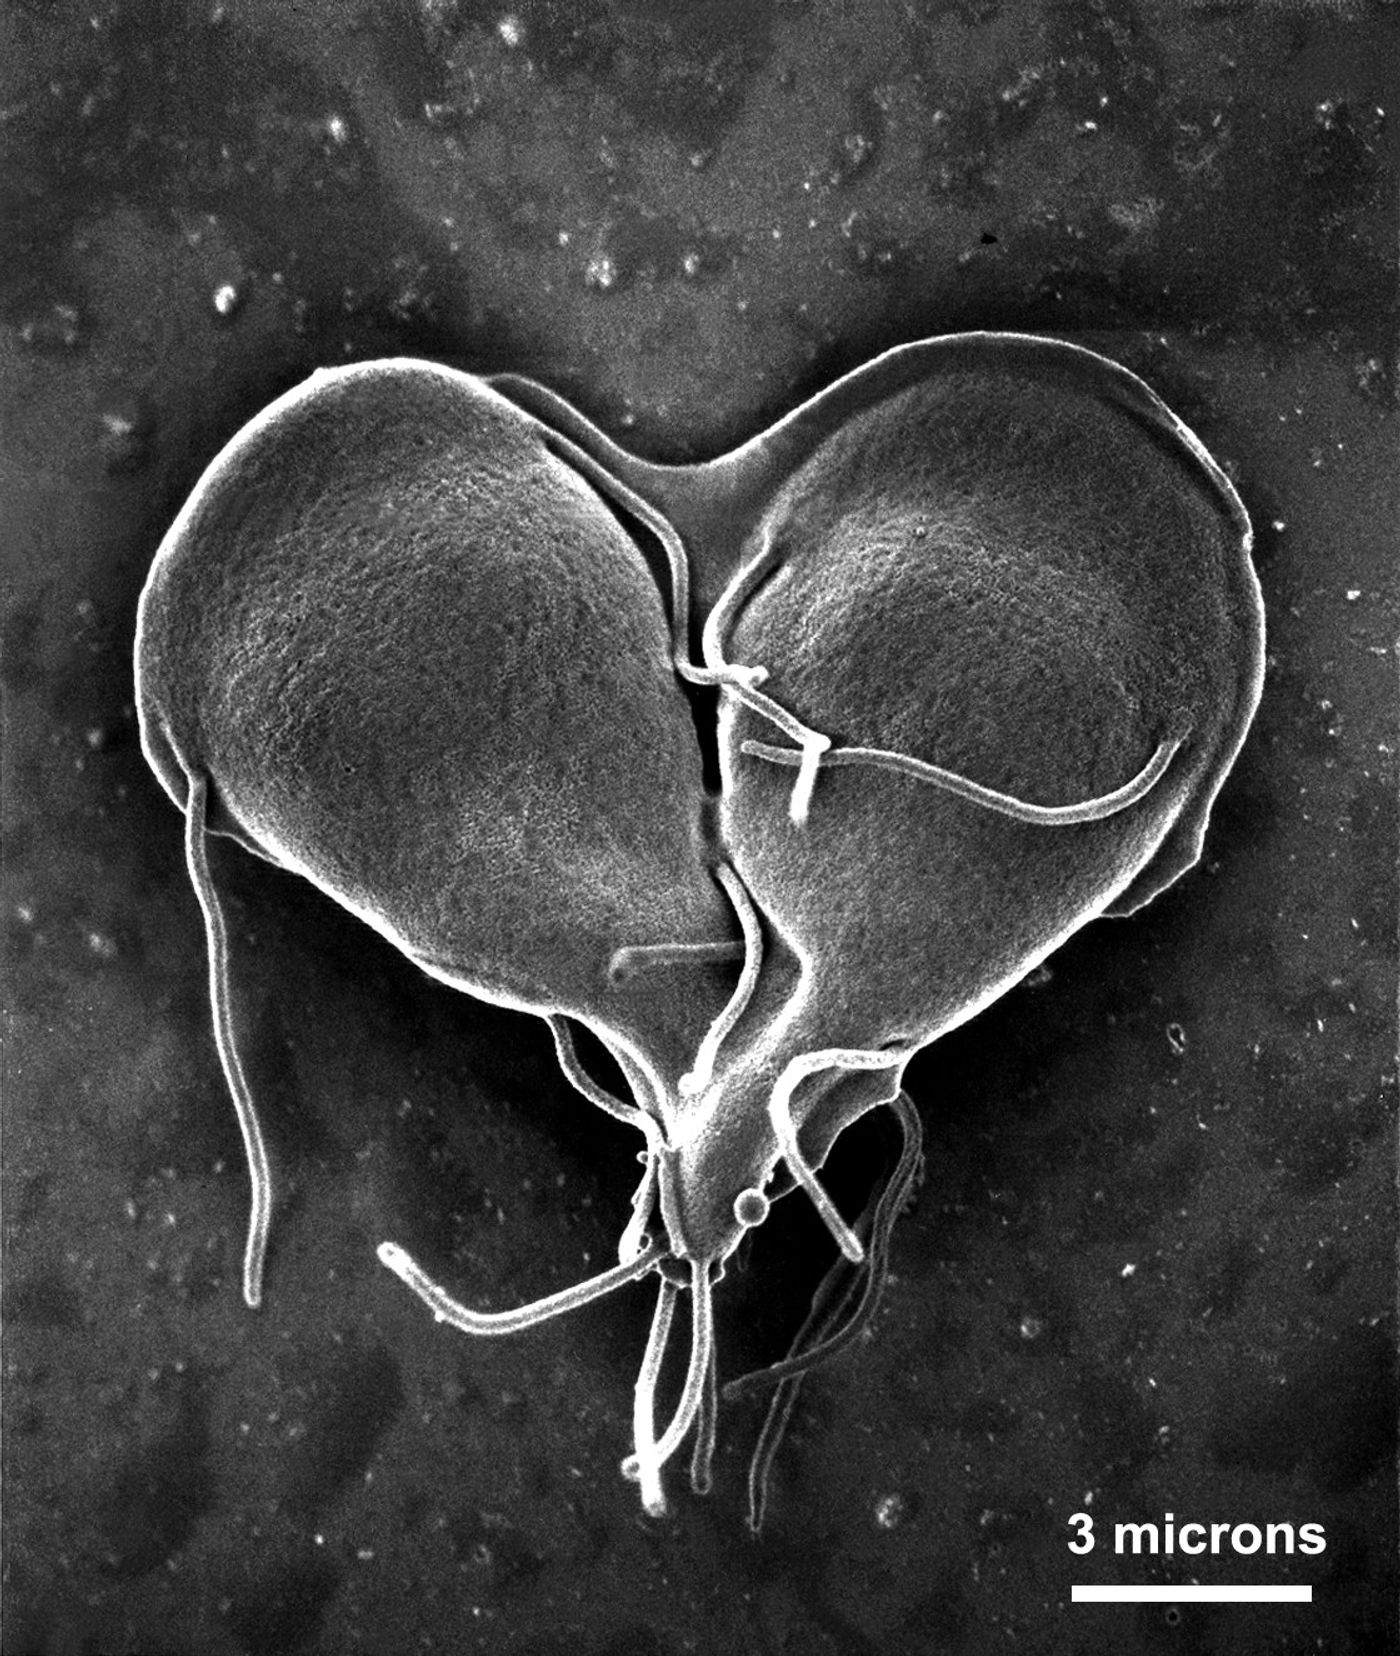 Giardia cell division forms a heart